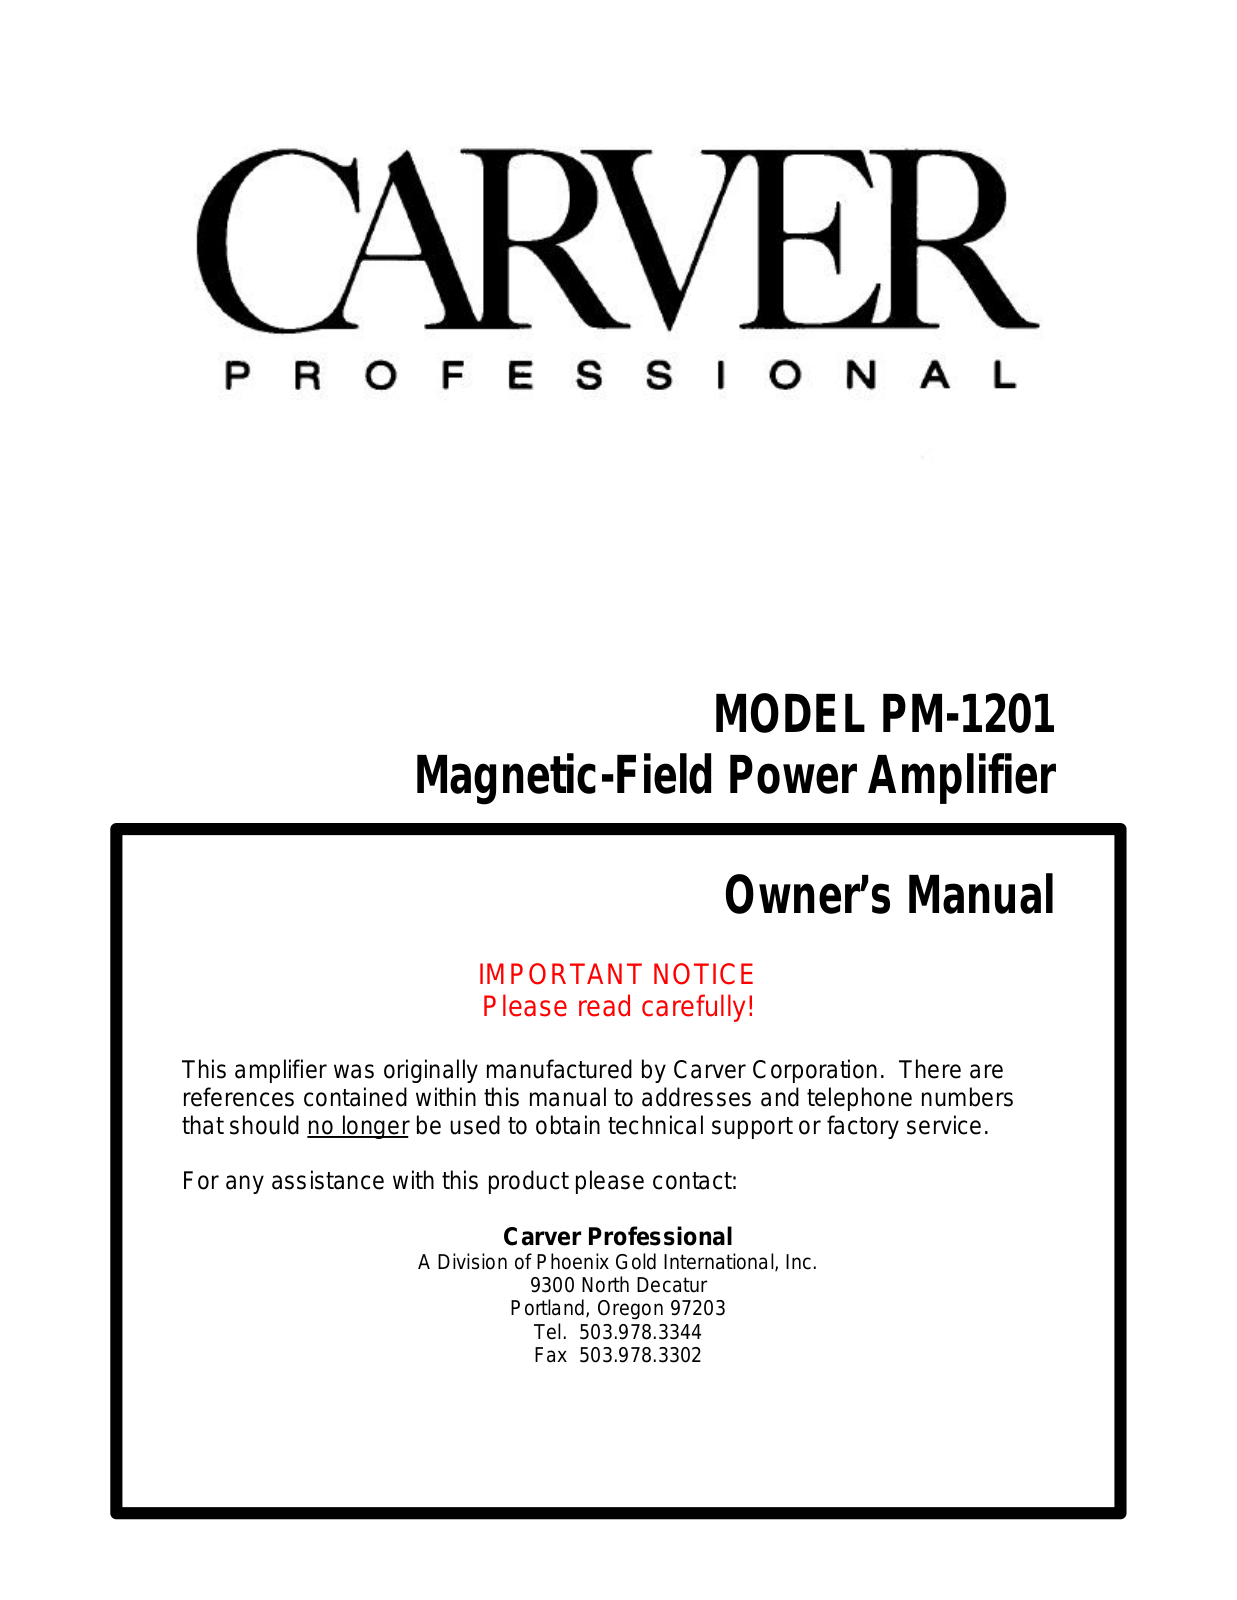 Carver PT-1201 Owners manual